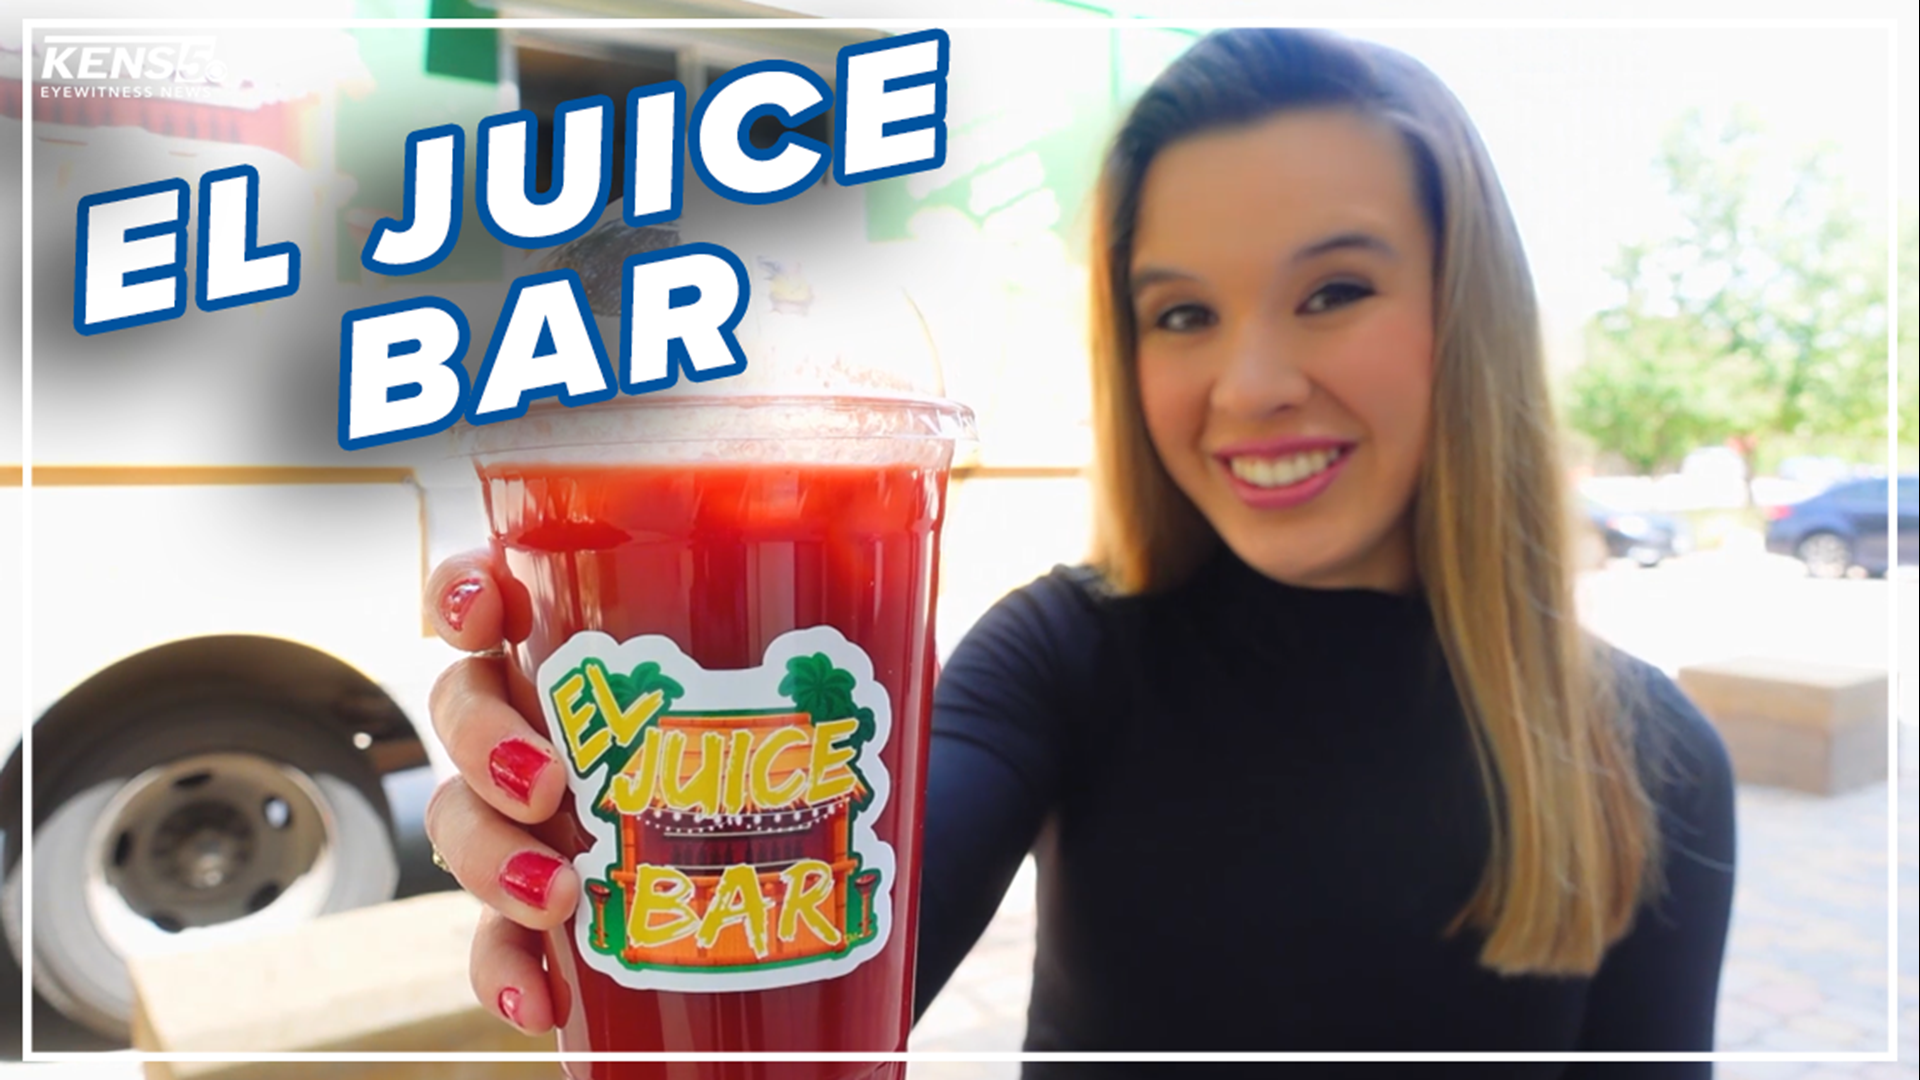 Five months after Andrew Mora's sister passed away, El Juice Bar became what it is today in her memory.